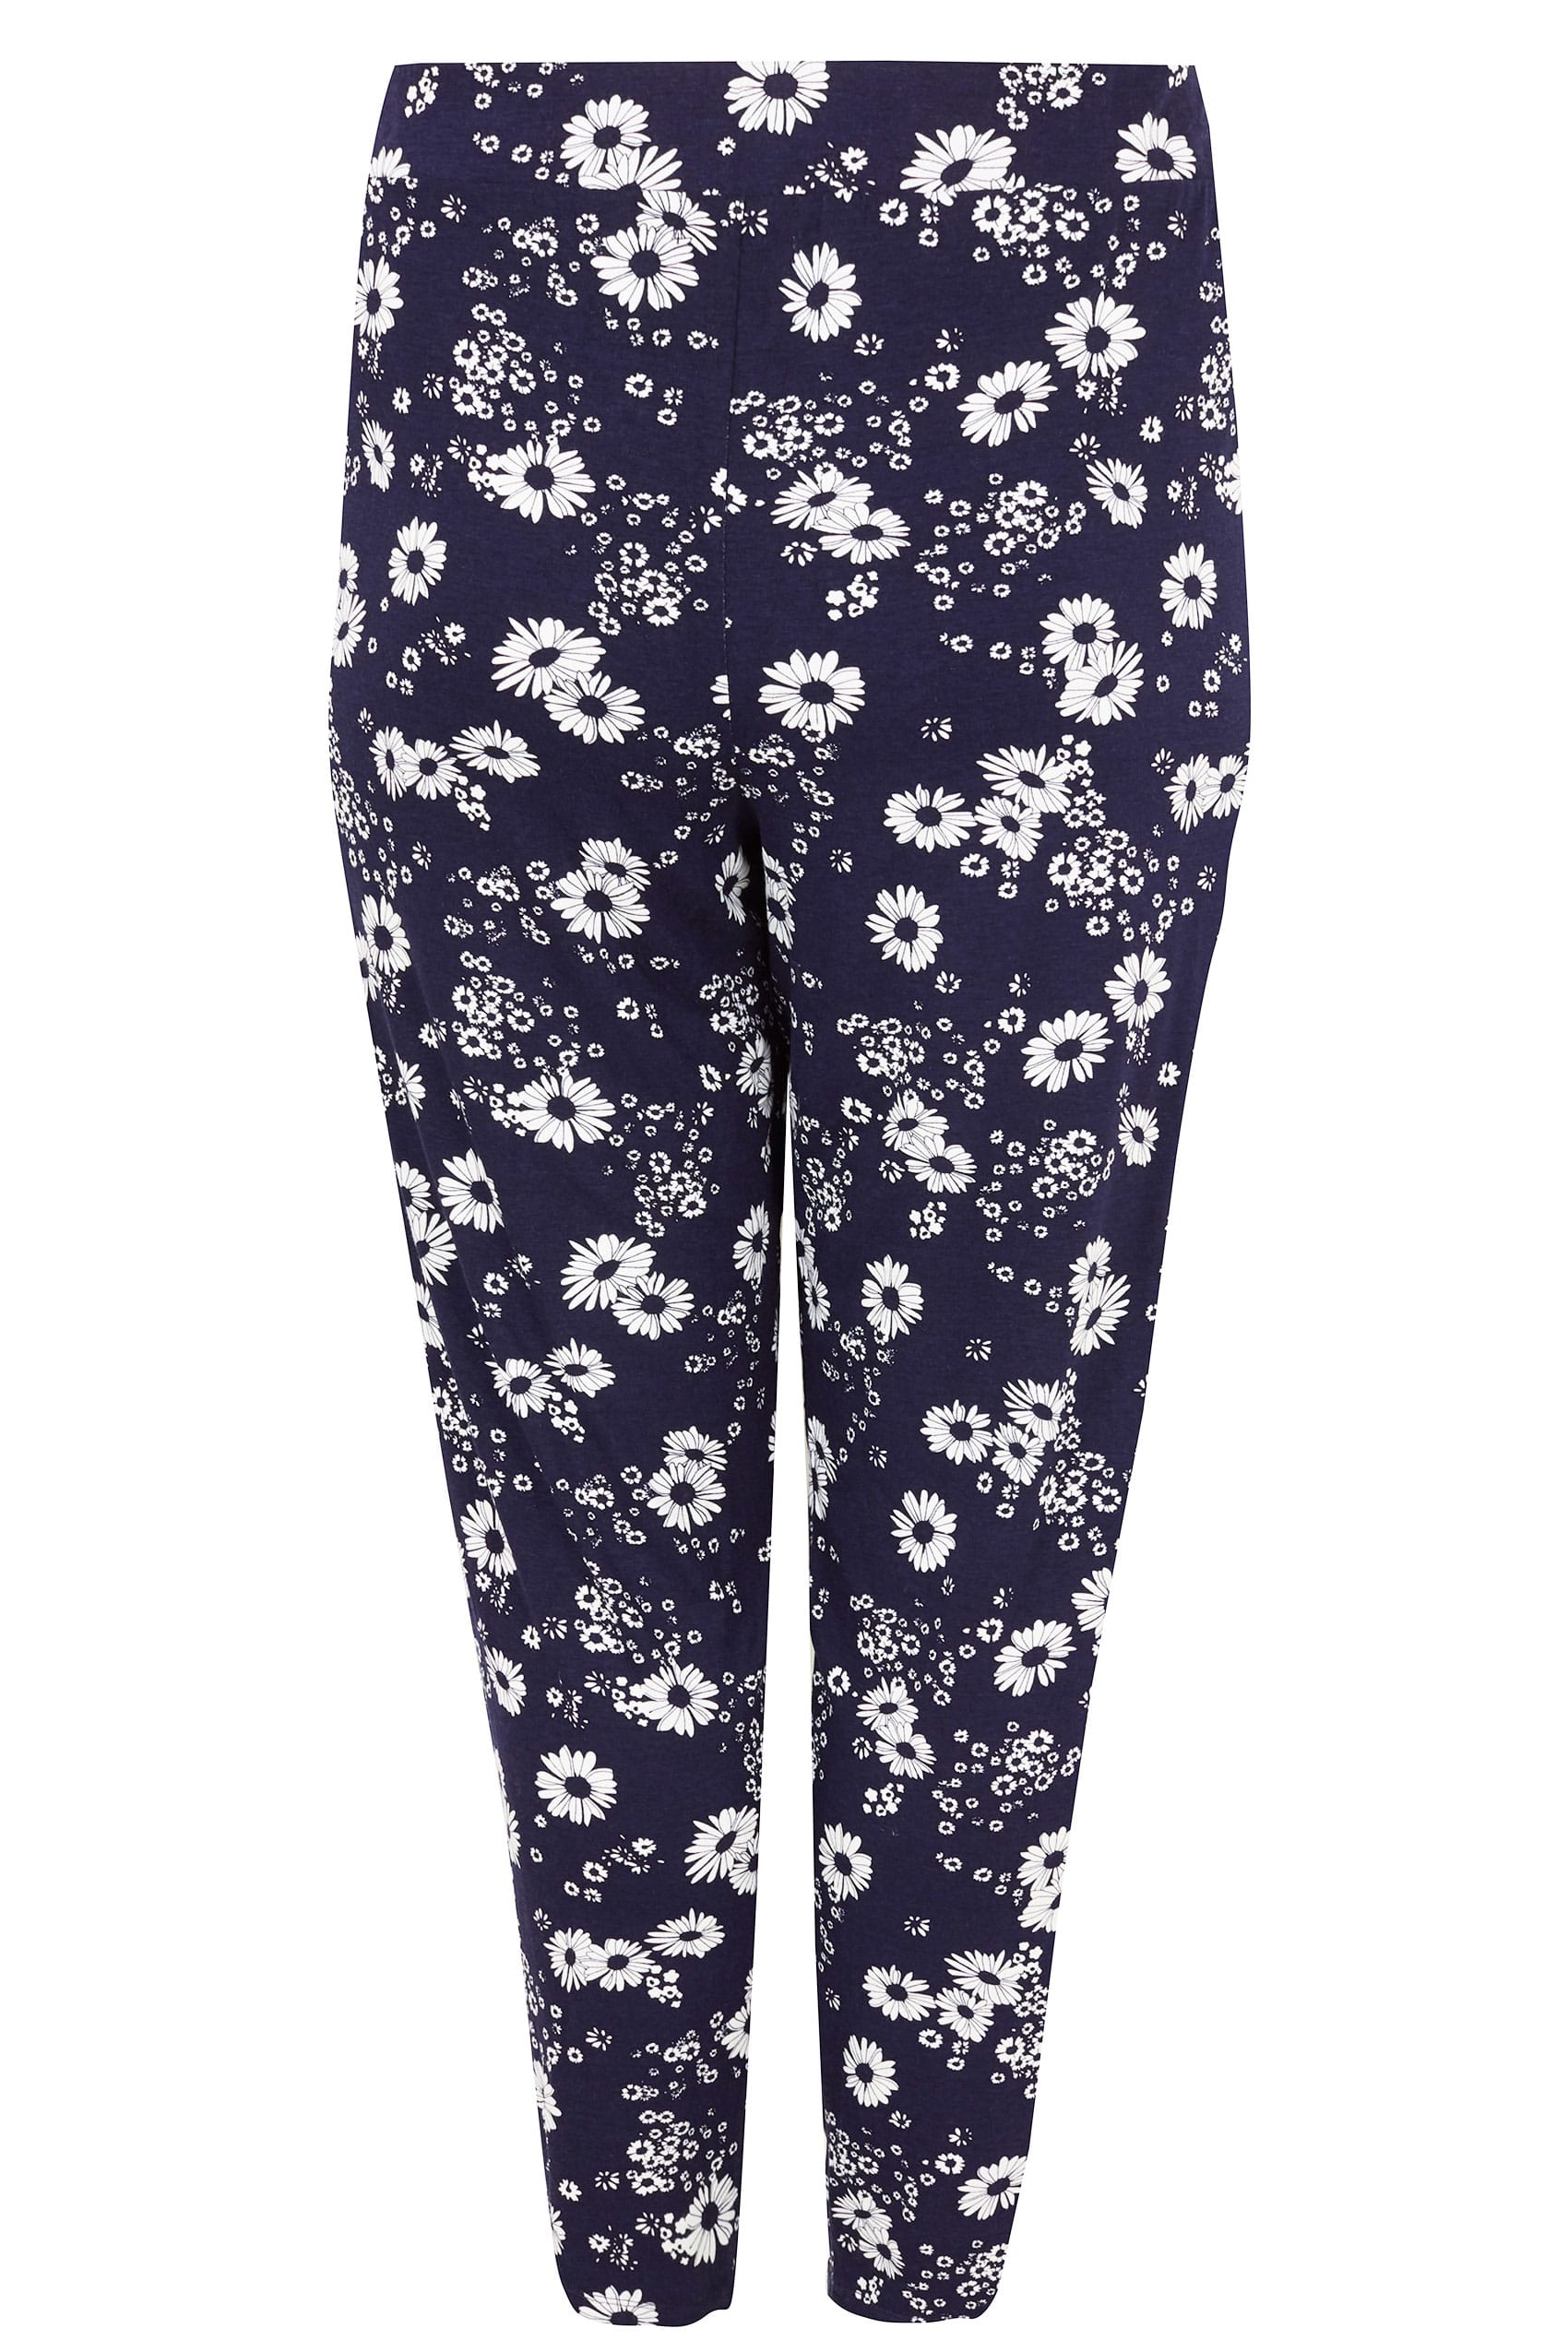 Navy Floral Print Jersey Harem Trousers, Plus size 16 to 36